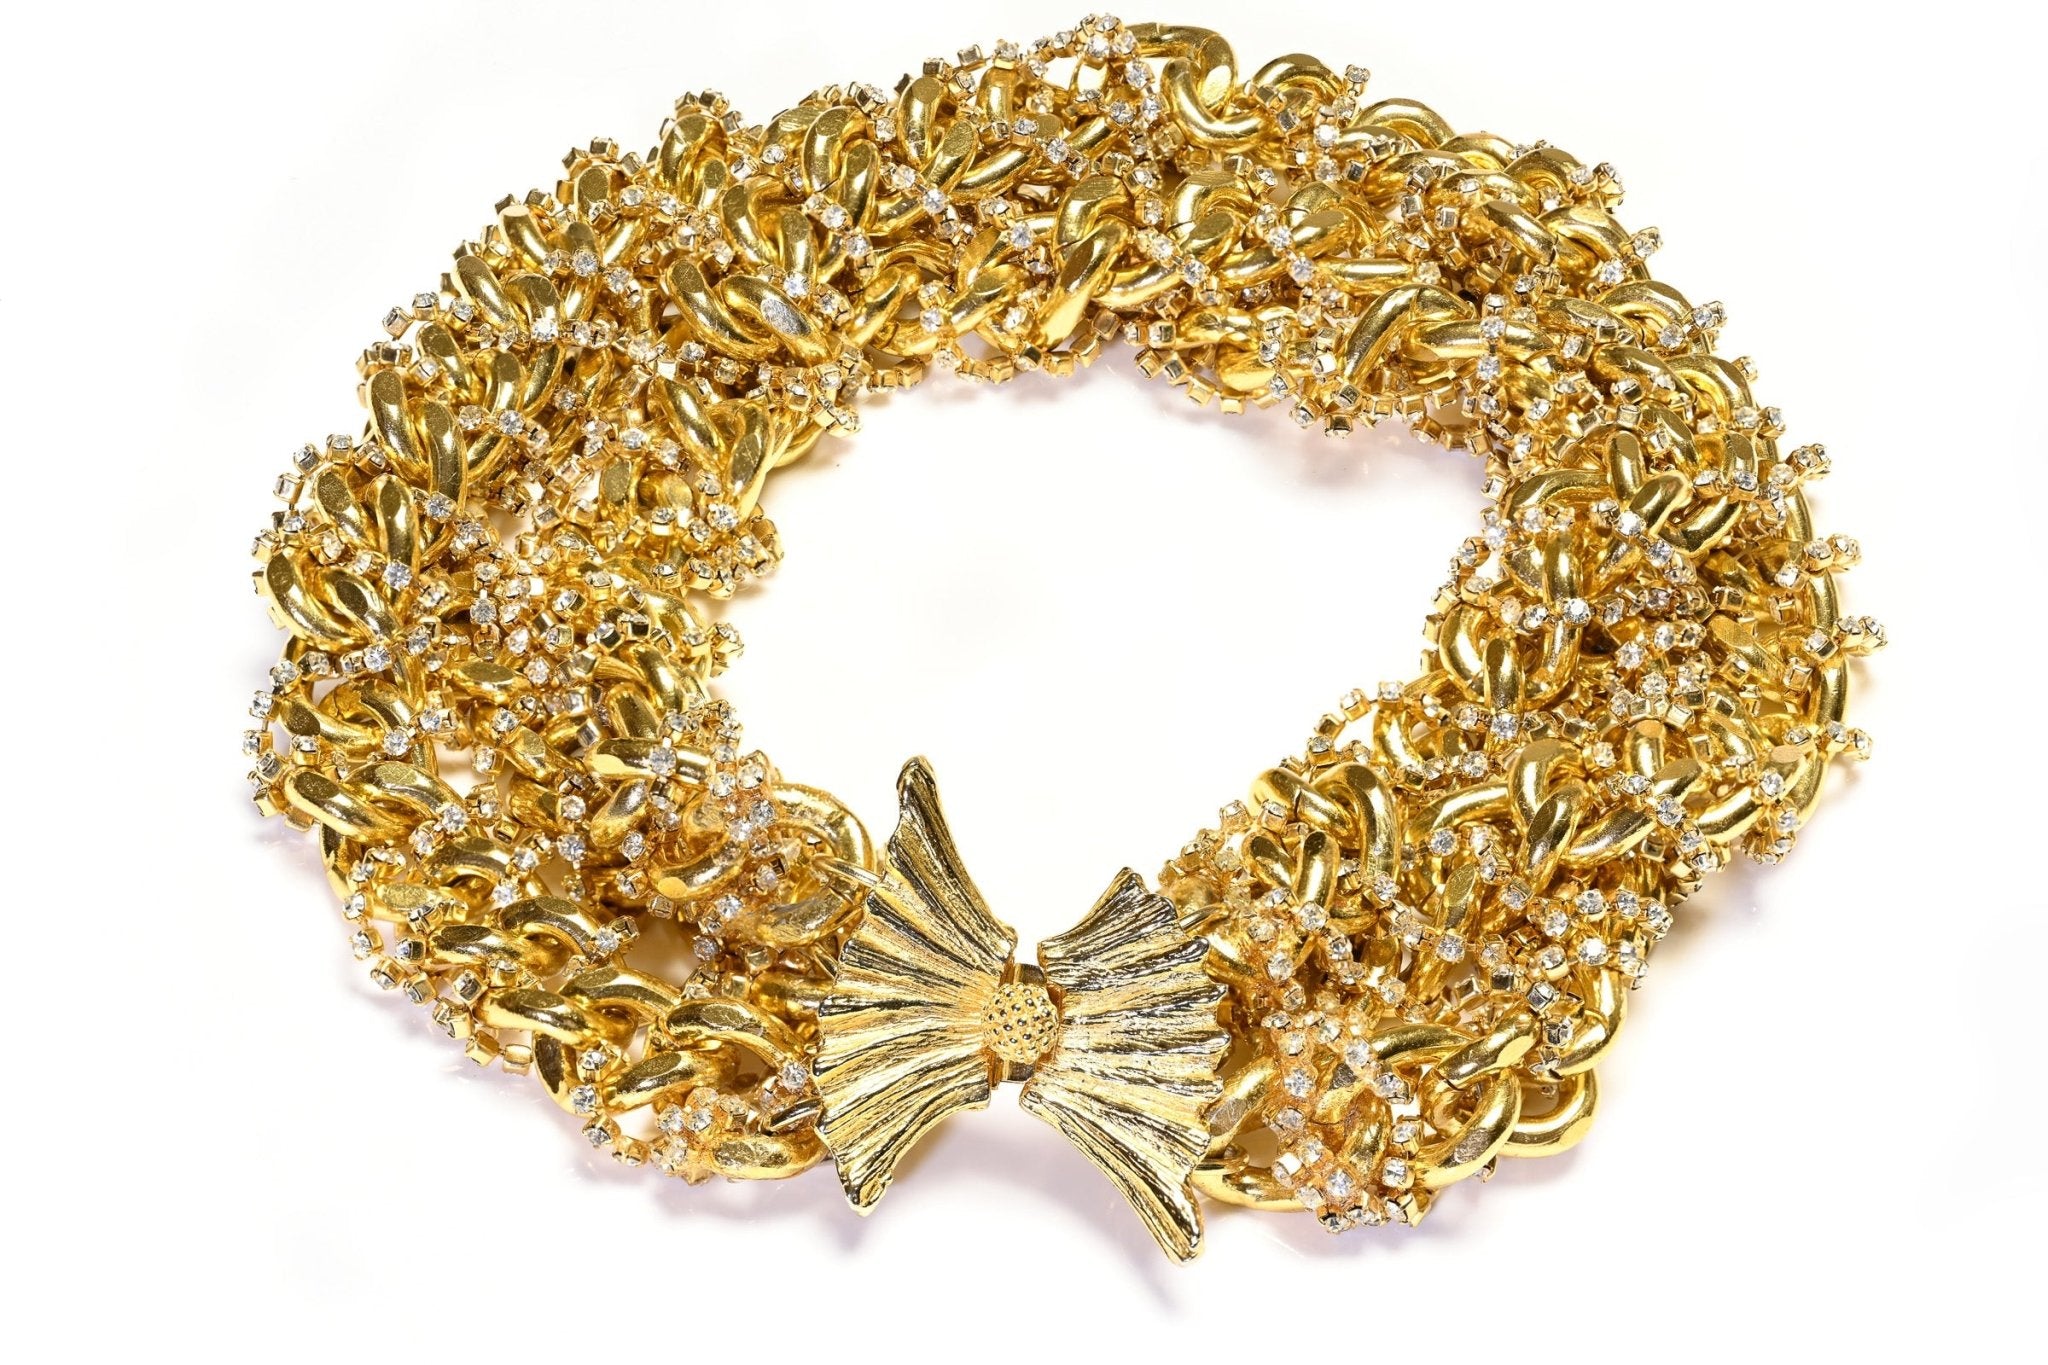 Vintage Gold Plated Wide 3 Strand Chain Link Crystal Twist Collar Necklace